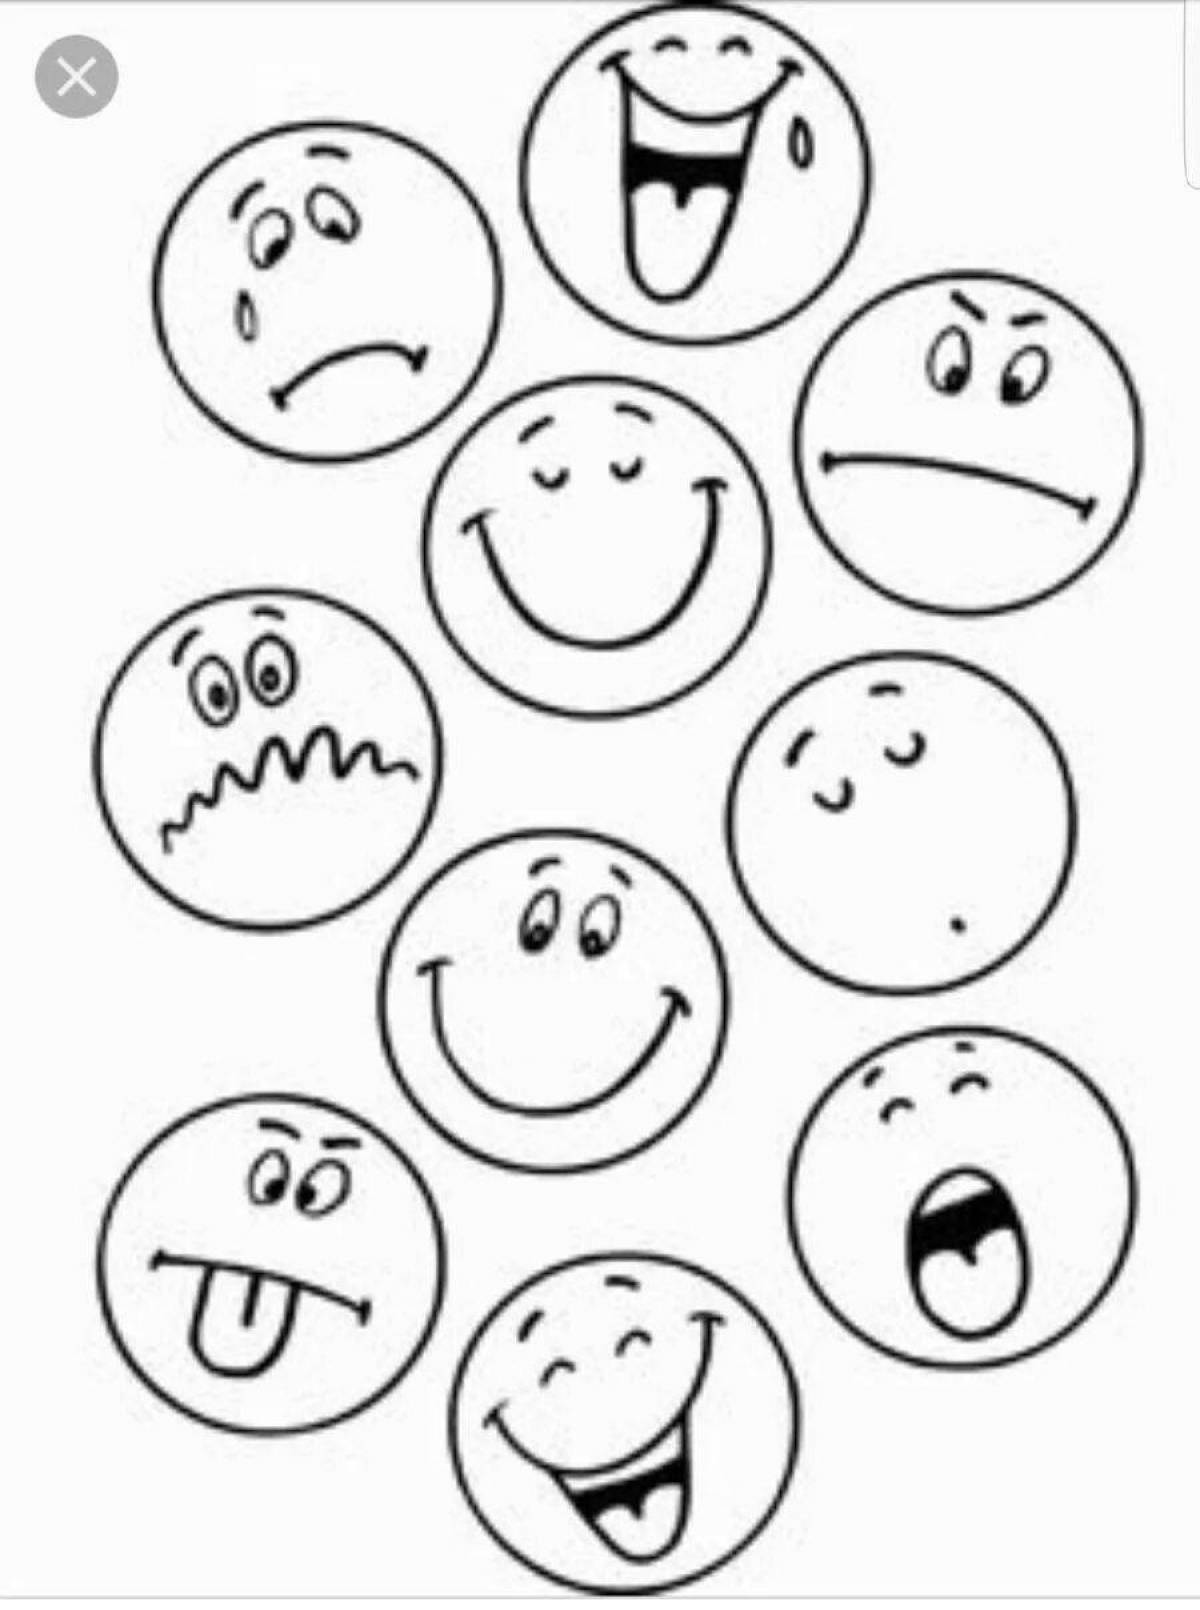 Coloring content emotions and feelings for children